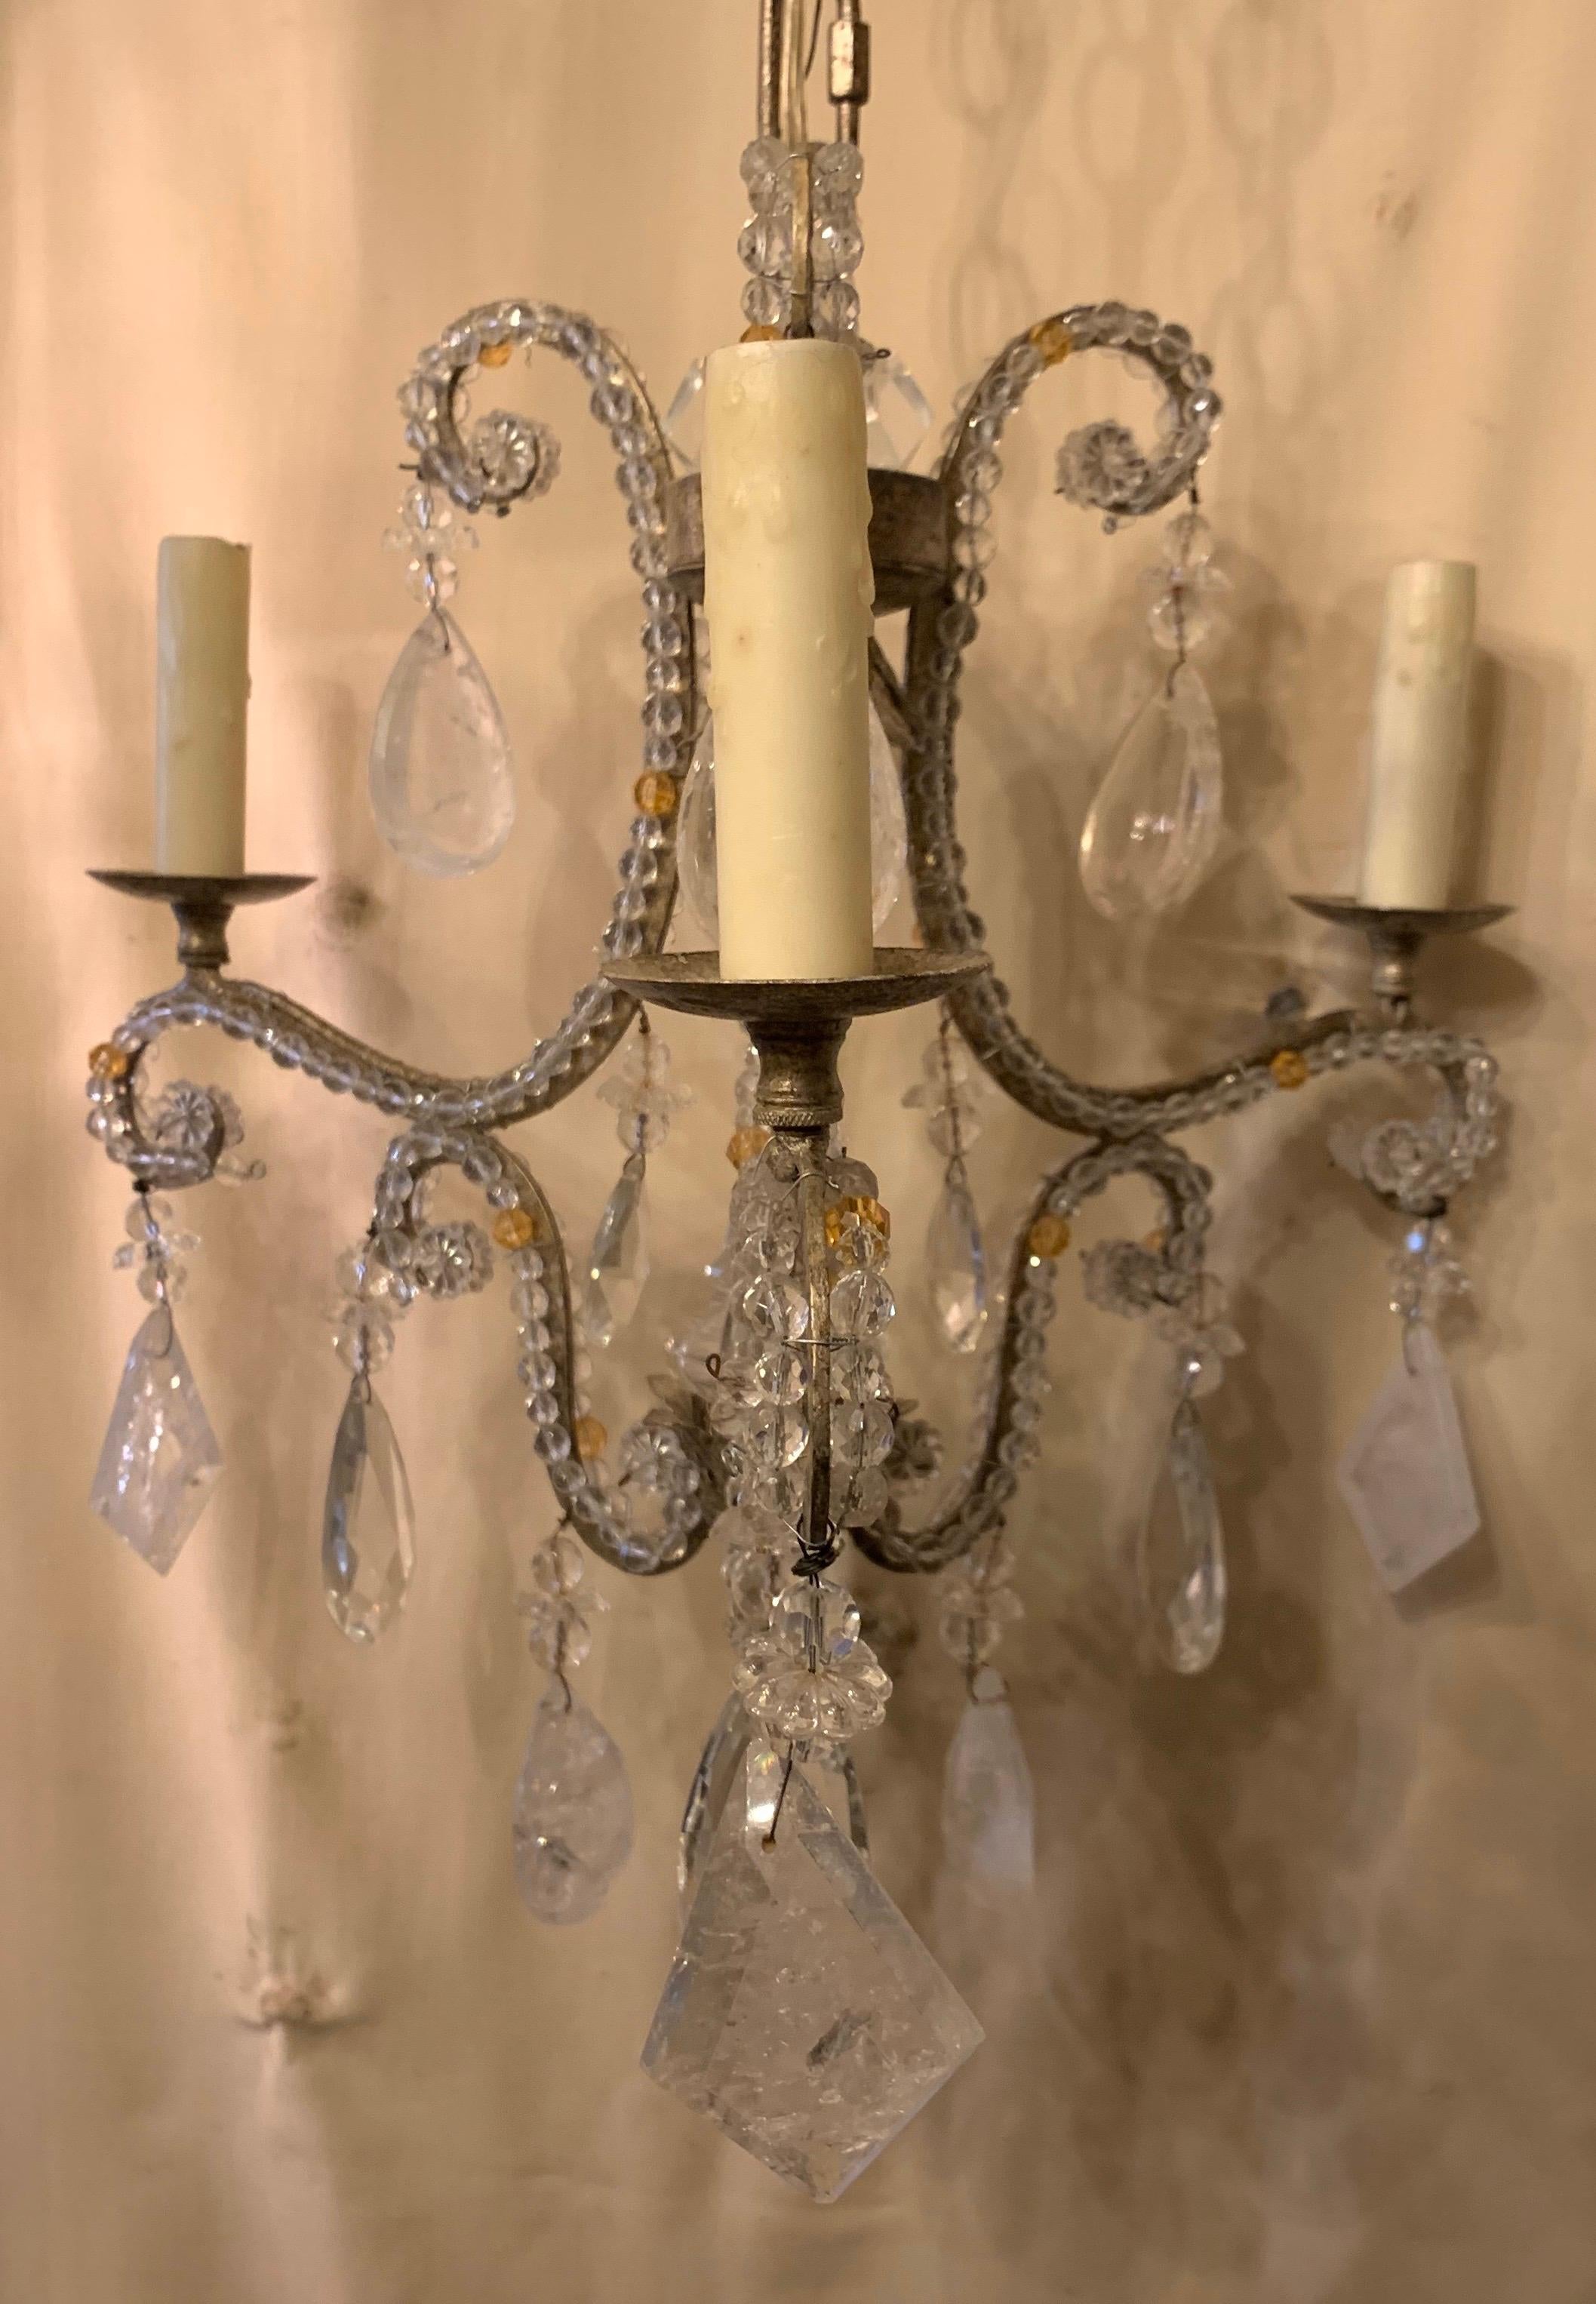 A wonderful Baguès style rock crystal, antique silver gilt and crystal beaded petite chandelier 3 candelabra light fixture centered with a crystal spike and finished on the bottom with a rock crystal ball.

Actual fixture measures 17